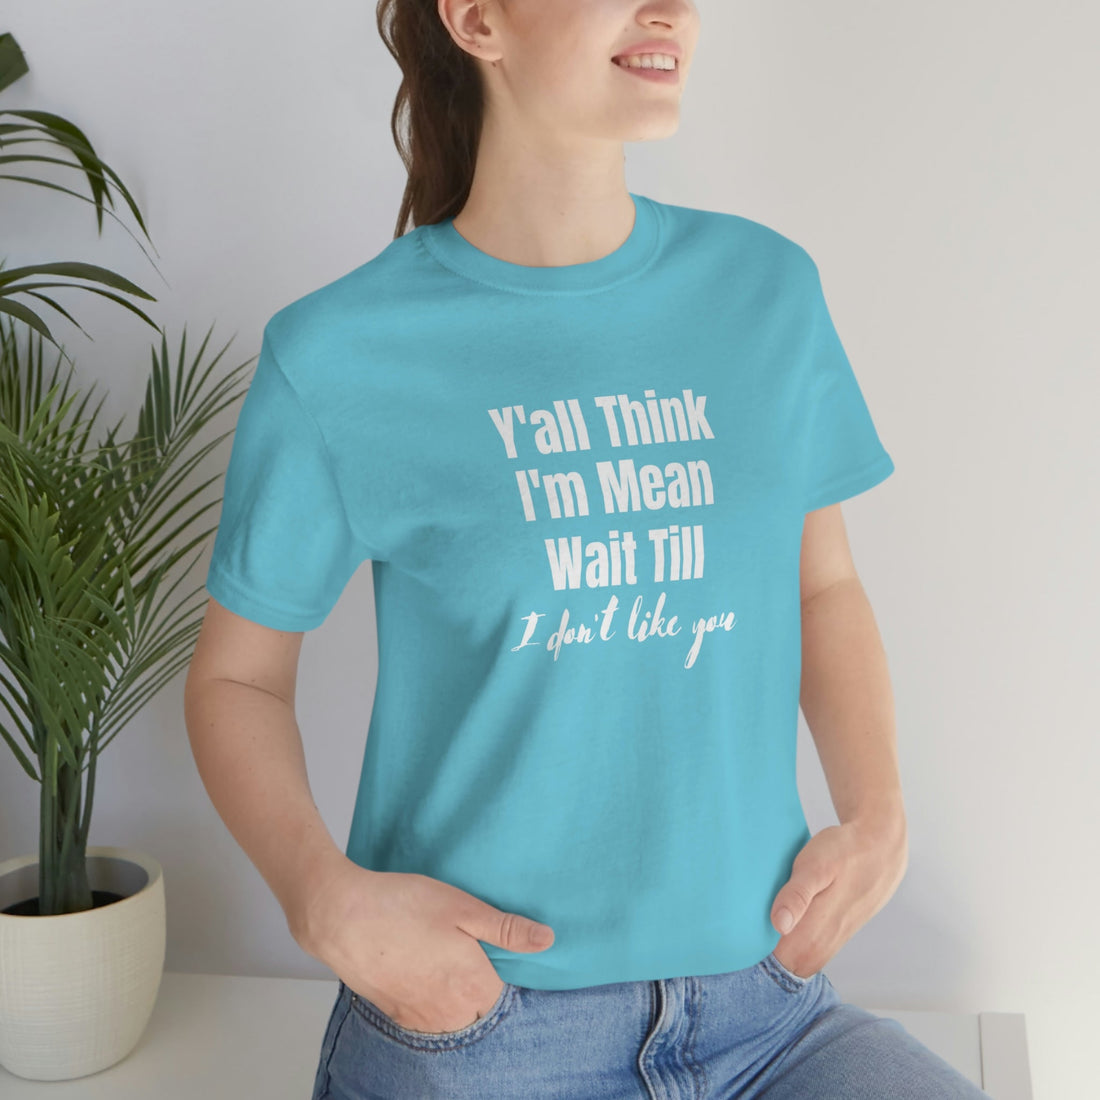 Y'all Think I'm Mean - T-Shirt - Positively Sassy - Y'all Think I'm Mean